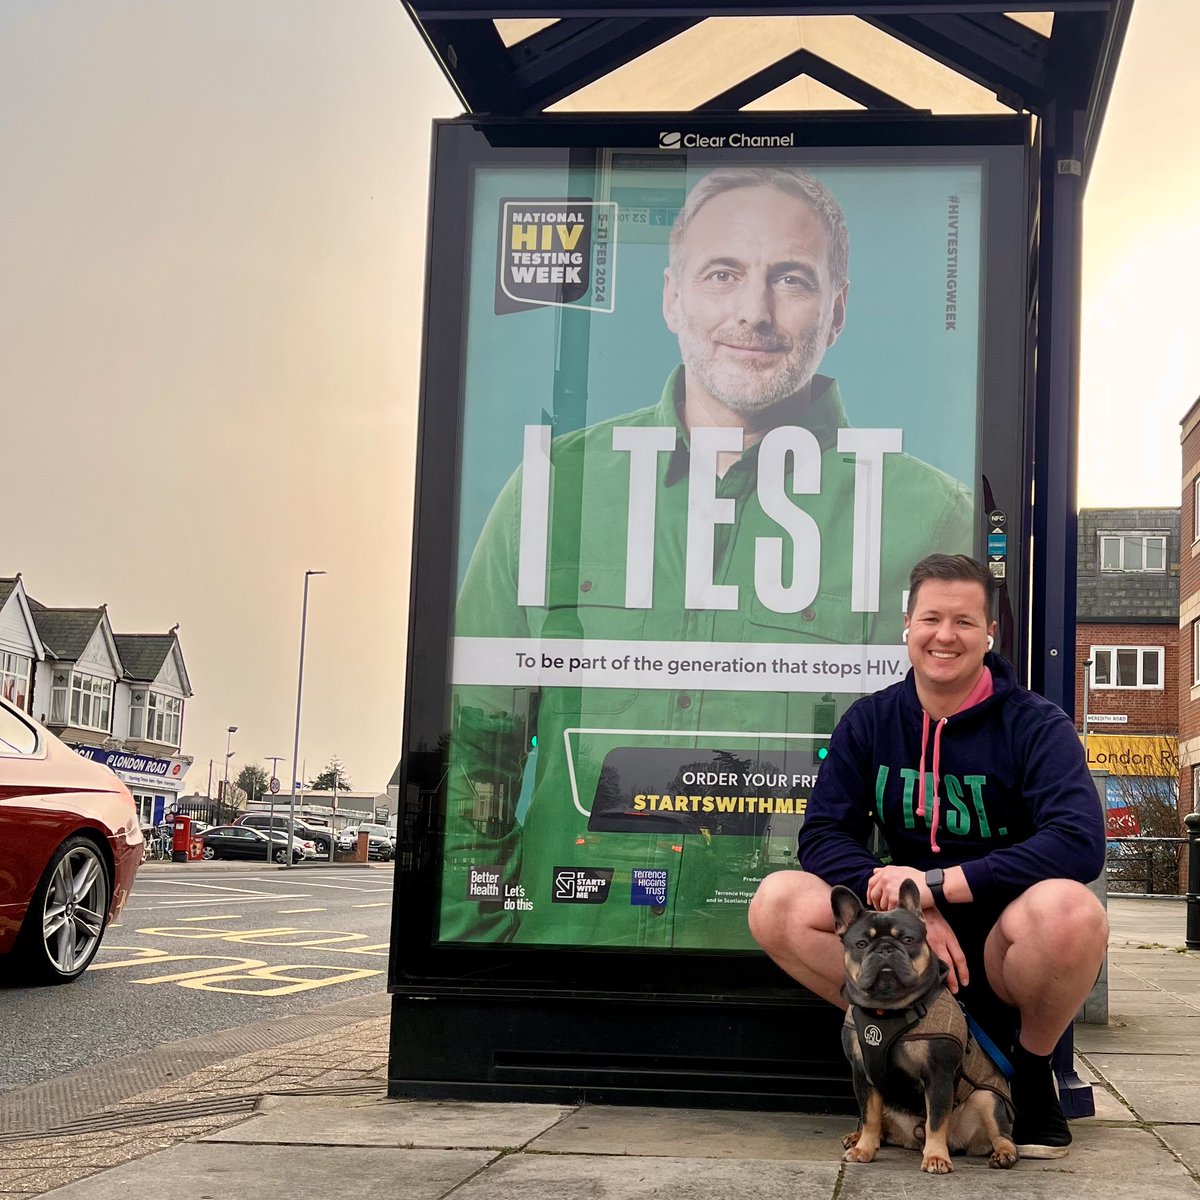 📍 Found this close to home in Portsmouth - #HIVTestingWeek! And guess what? The #ITEST hoodie was a coincidence on the way to the vet with Bertie 🐶
📆 5 Feb, get tested and know your status Undetectable = Untransmittable. #UequalsU
👉 order your test kit, visit @startswith_me.